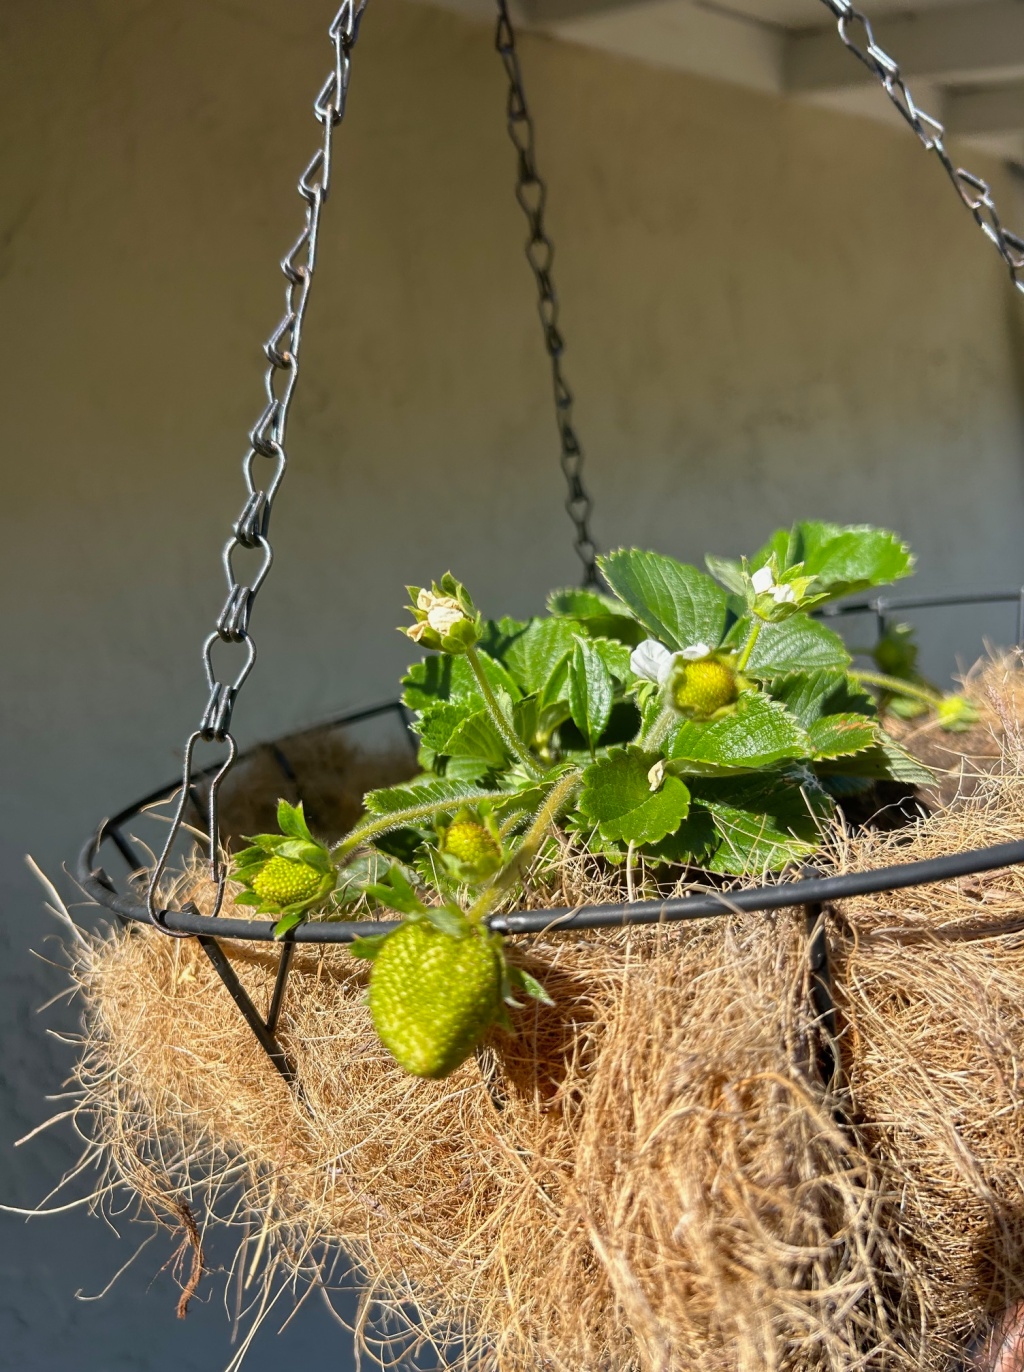 How to Grow Strawberries in Hanging Baskets